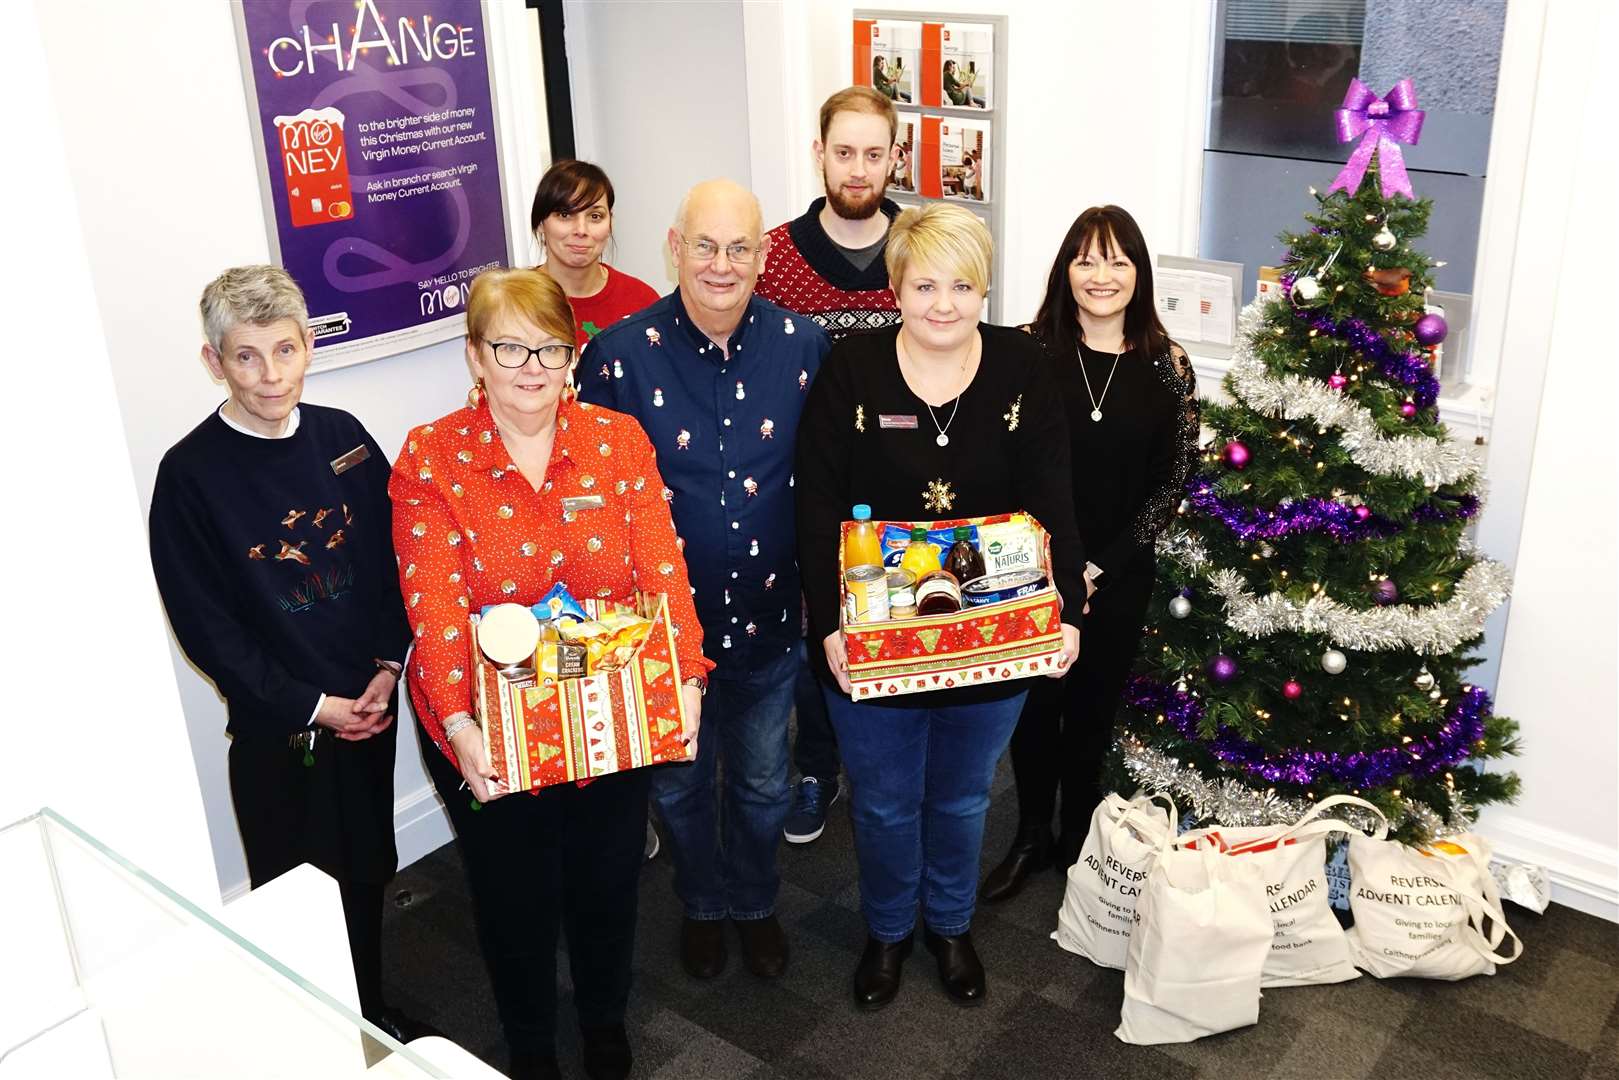 From left: Janice McCarthy, Emily Fraser, Grant Ramsay (Caithness Foodbank), Maria Paterson and Lorraine Sutherland, with Kimberly Miller-Rosie and David Morris-Ashton at the back.